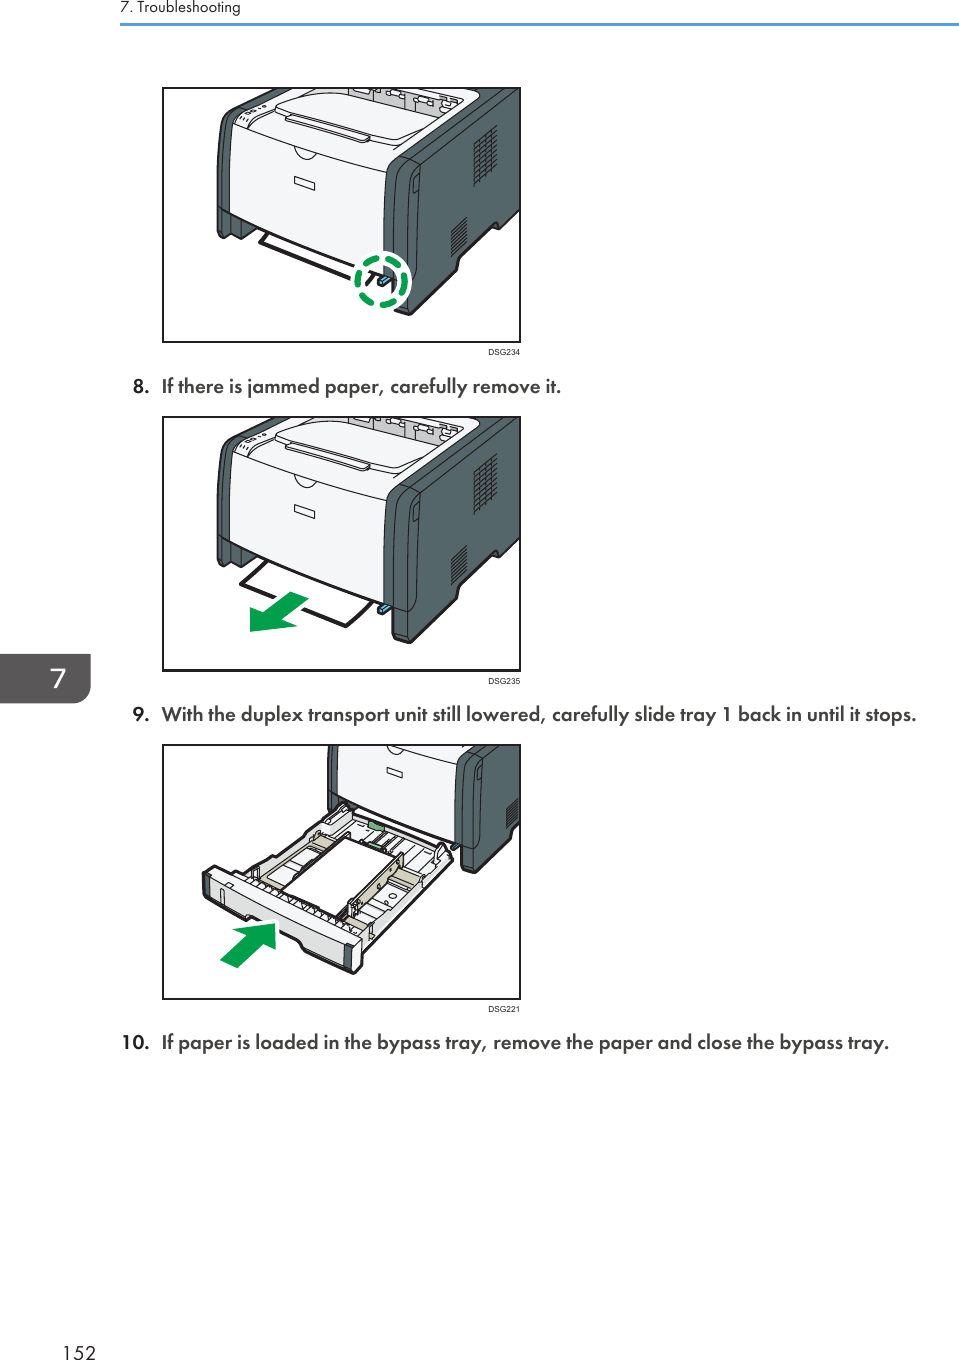 DSG2348. If there is jammed paper, carefully remove it.DSG2359. With the duplex transport unit still lowered, carefully slide tray 1 back in until it stops.DSG22110. If paper is loaded in the bypass tray, remove the paper and close the bypass tray.7. Troubleshooting152